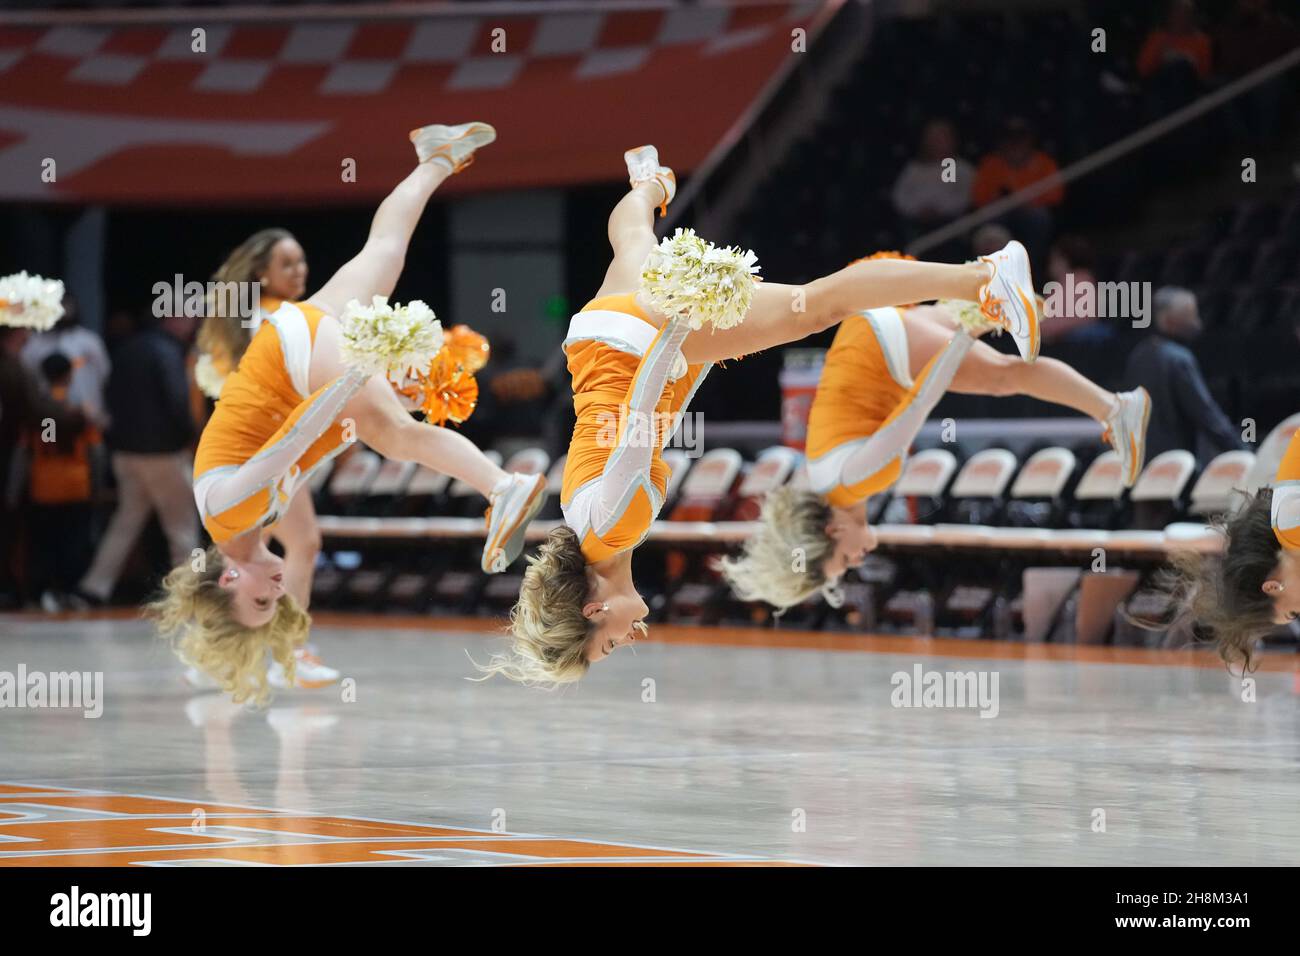 October 30, 2021: Tennessee Volunteers cheerleaders perform during the NCAA basketball game between the University of Tennessee Volunteers and the Presbyterian College Blue Hose at Thompson-Boling Arena in Knoxville TN Tim Gangloff/CSM Stock Photo